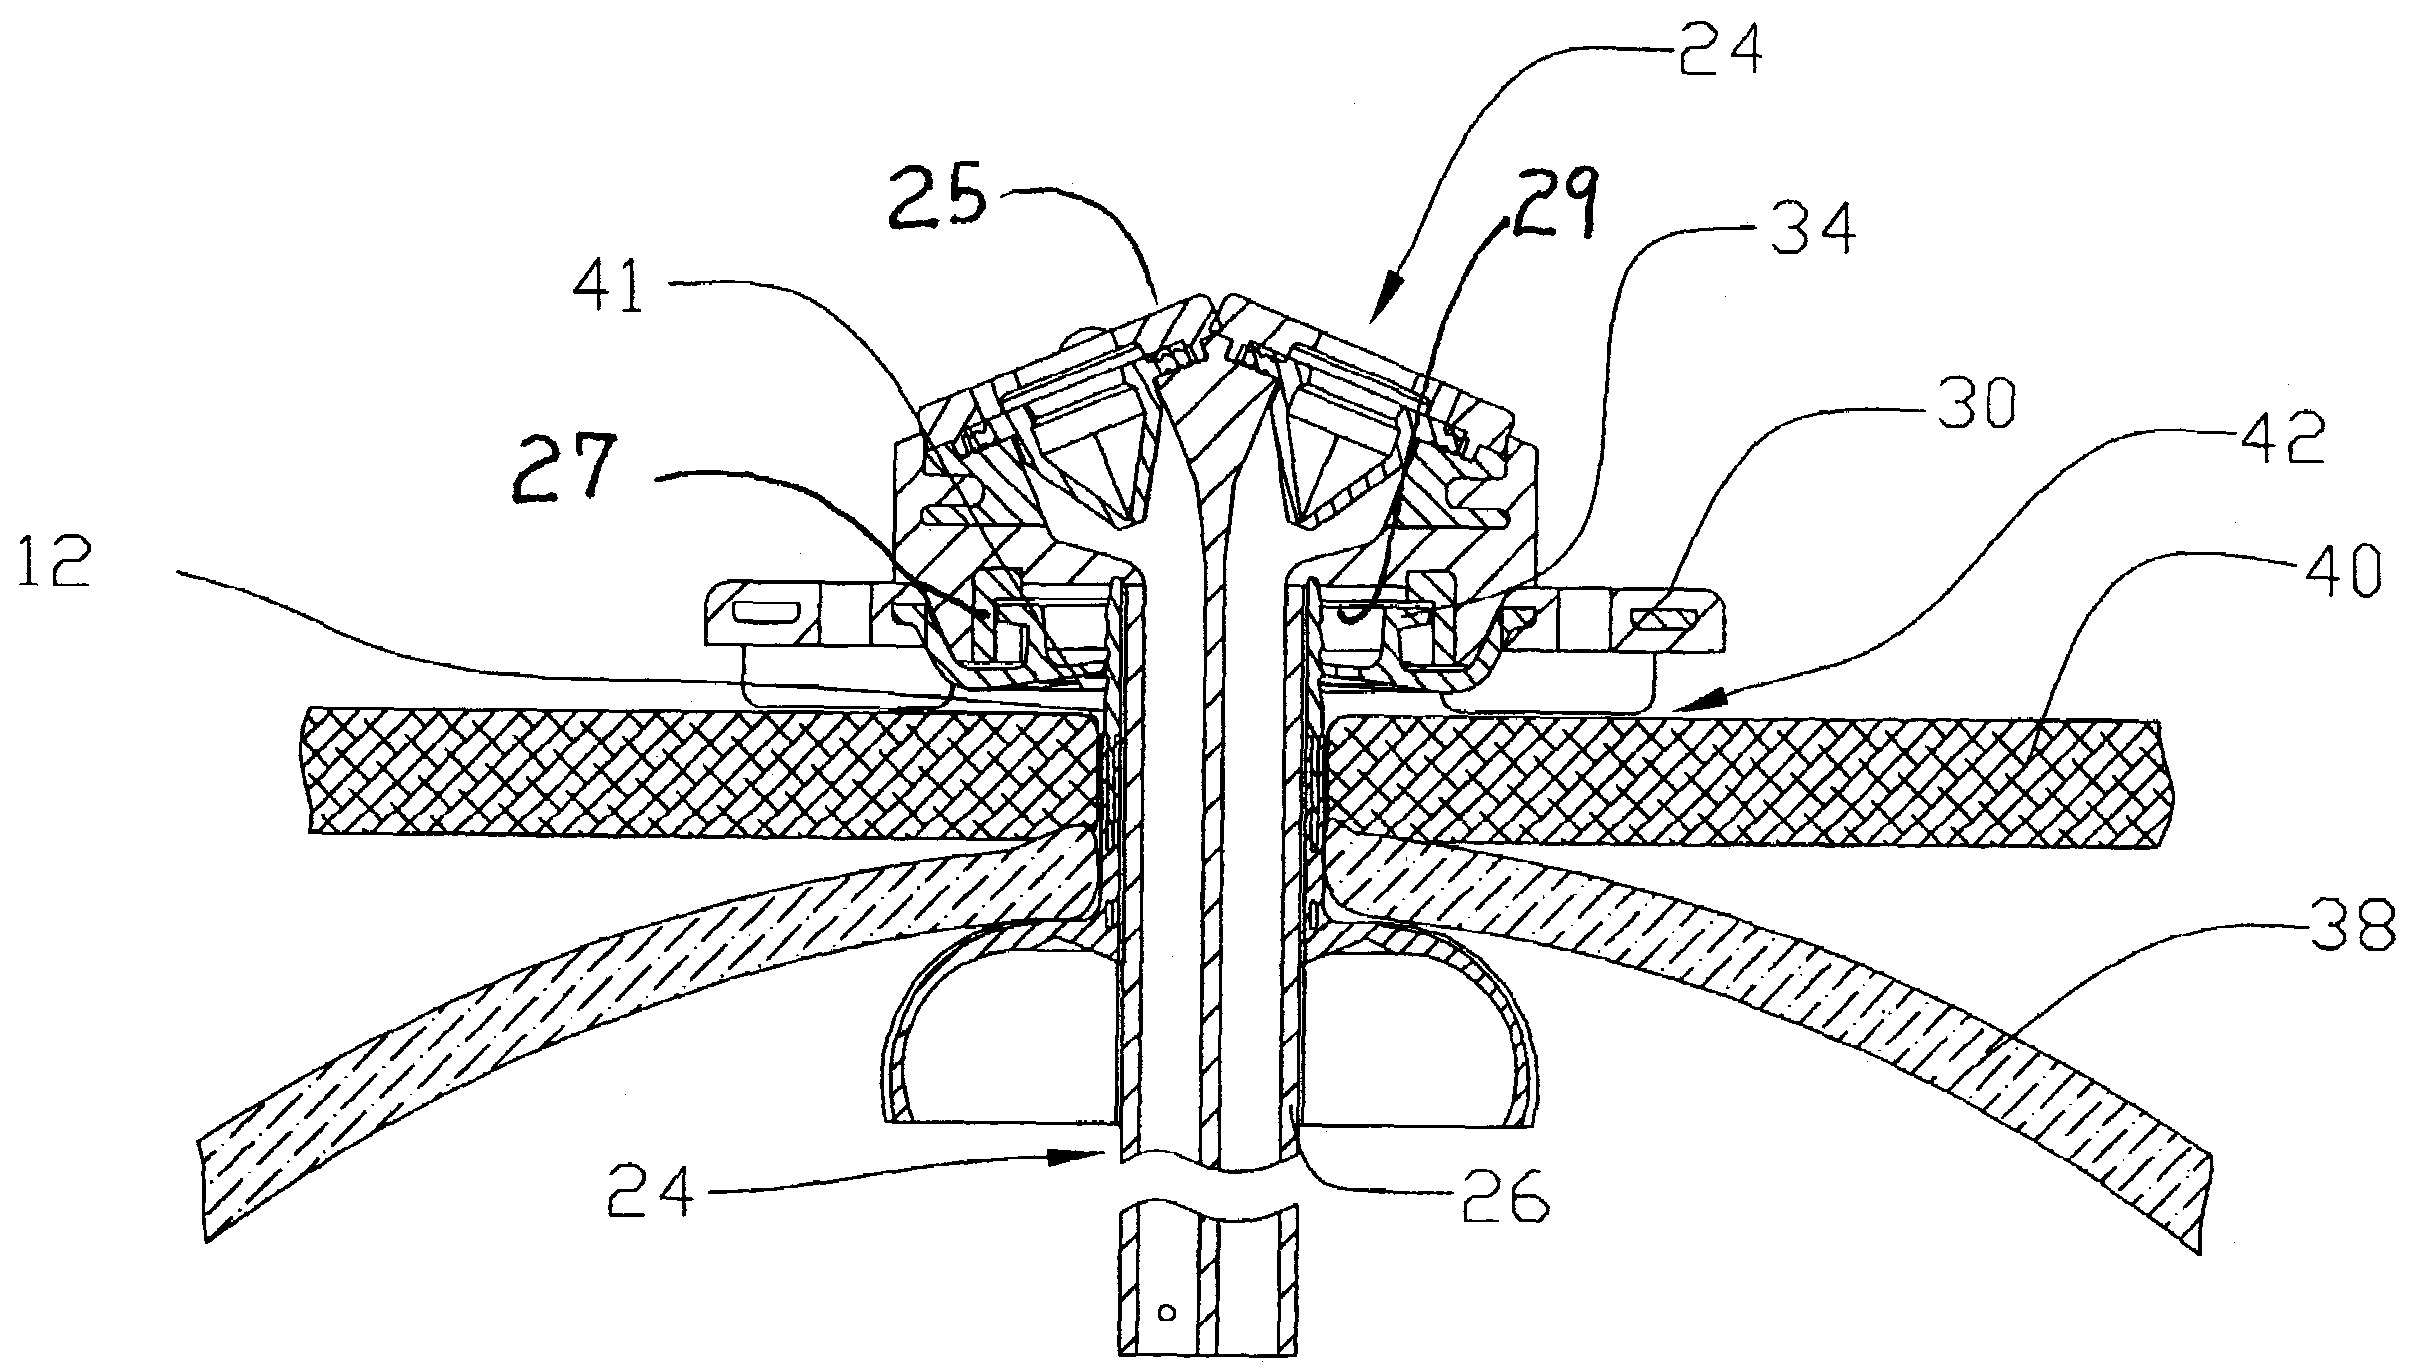 Artificial stoma and method of use